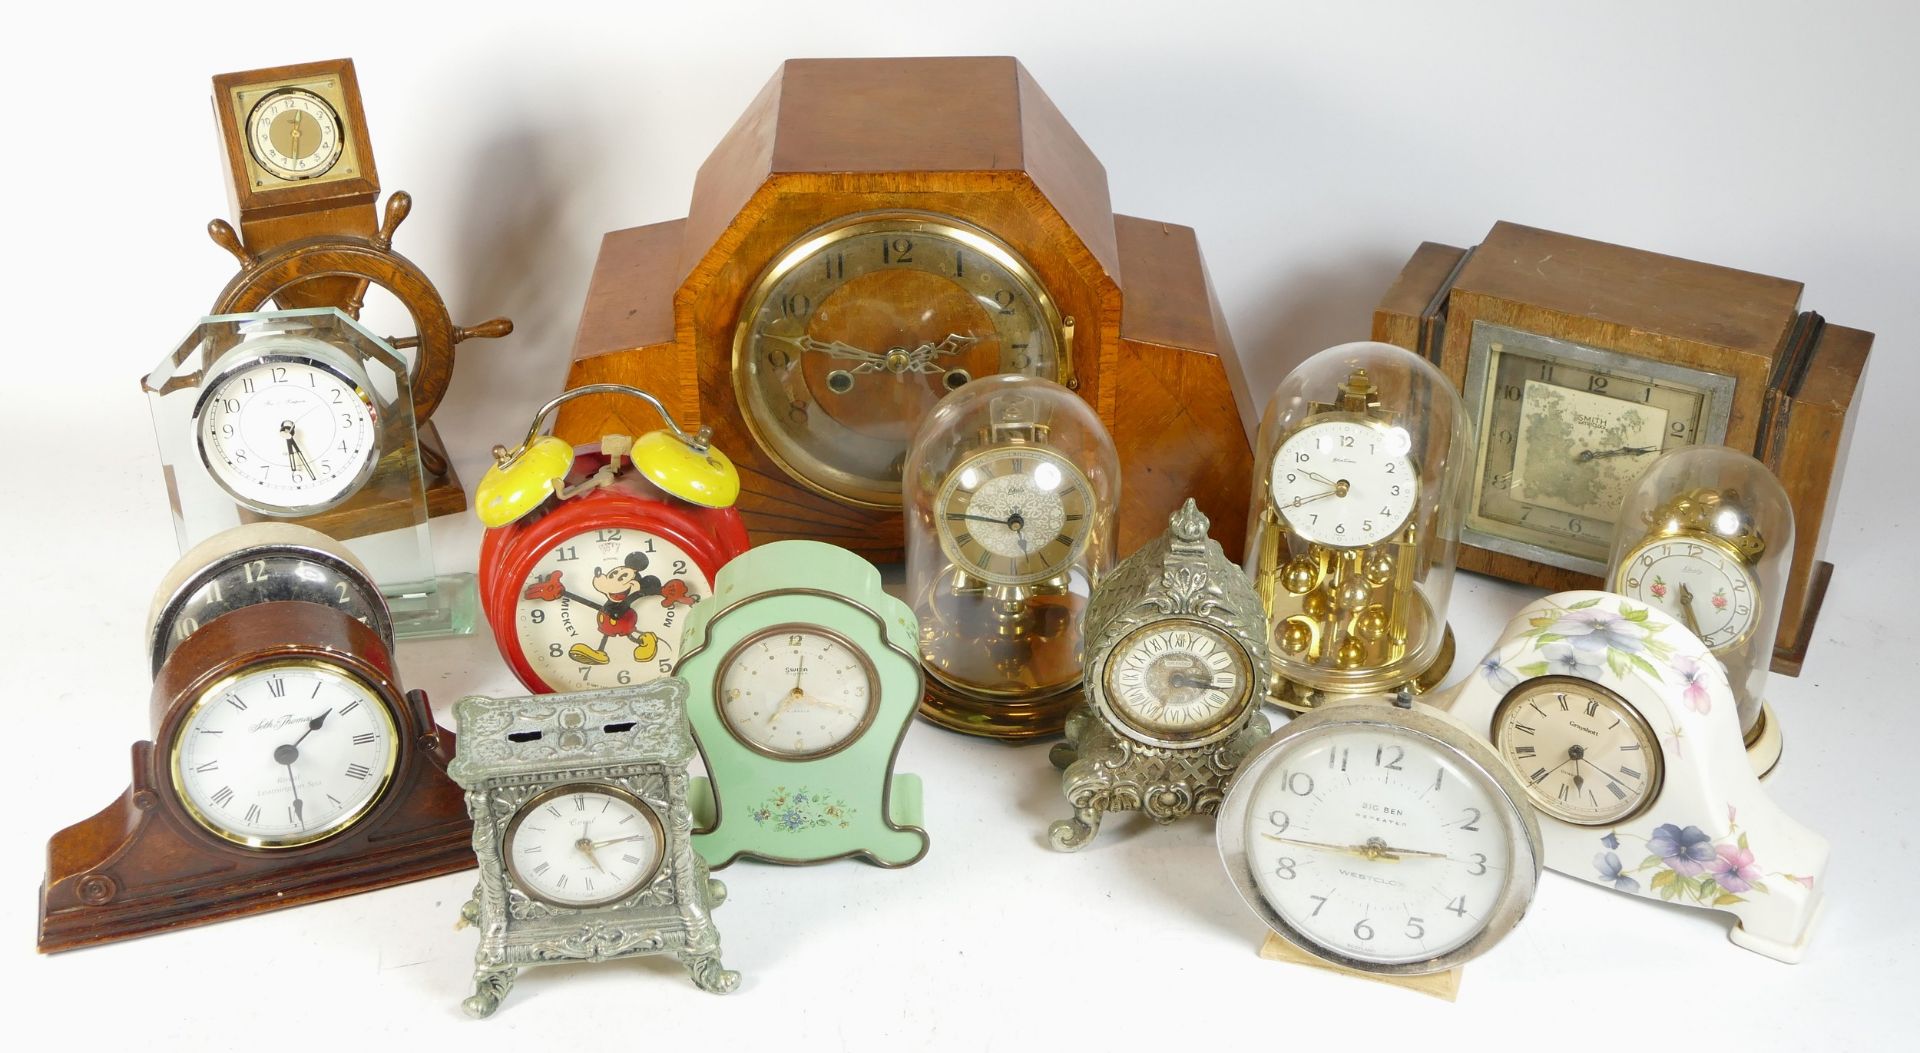 A collection of mid 20th century and later mantel clocks, alarm clocks and barometers, in three